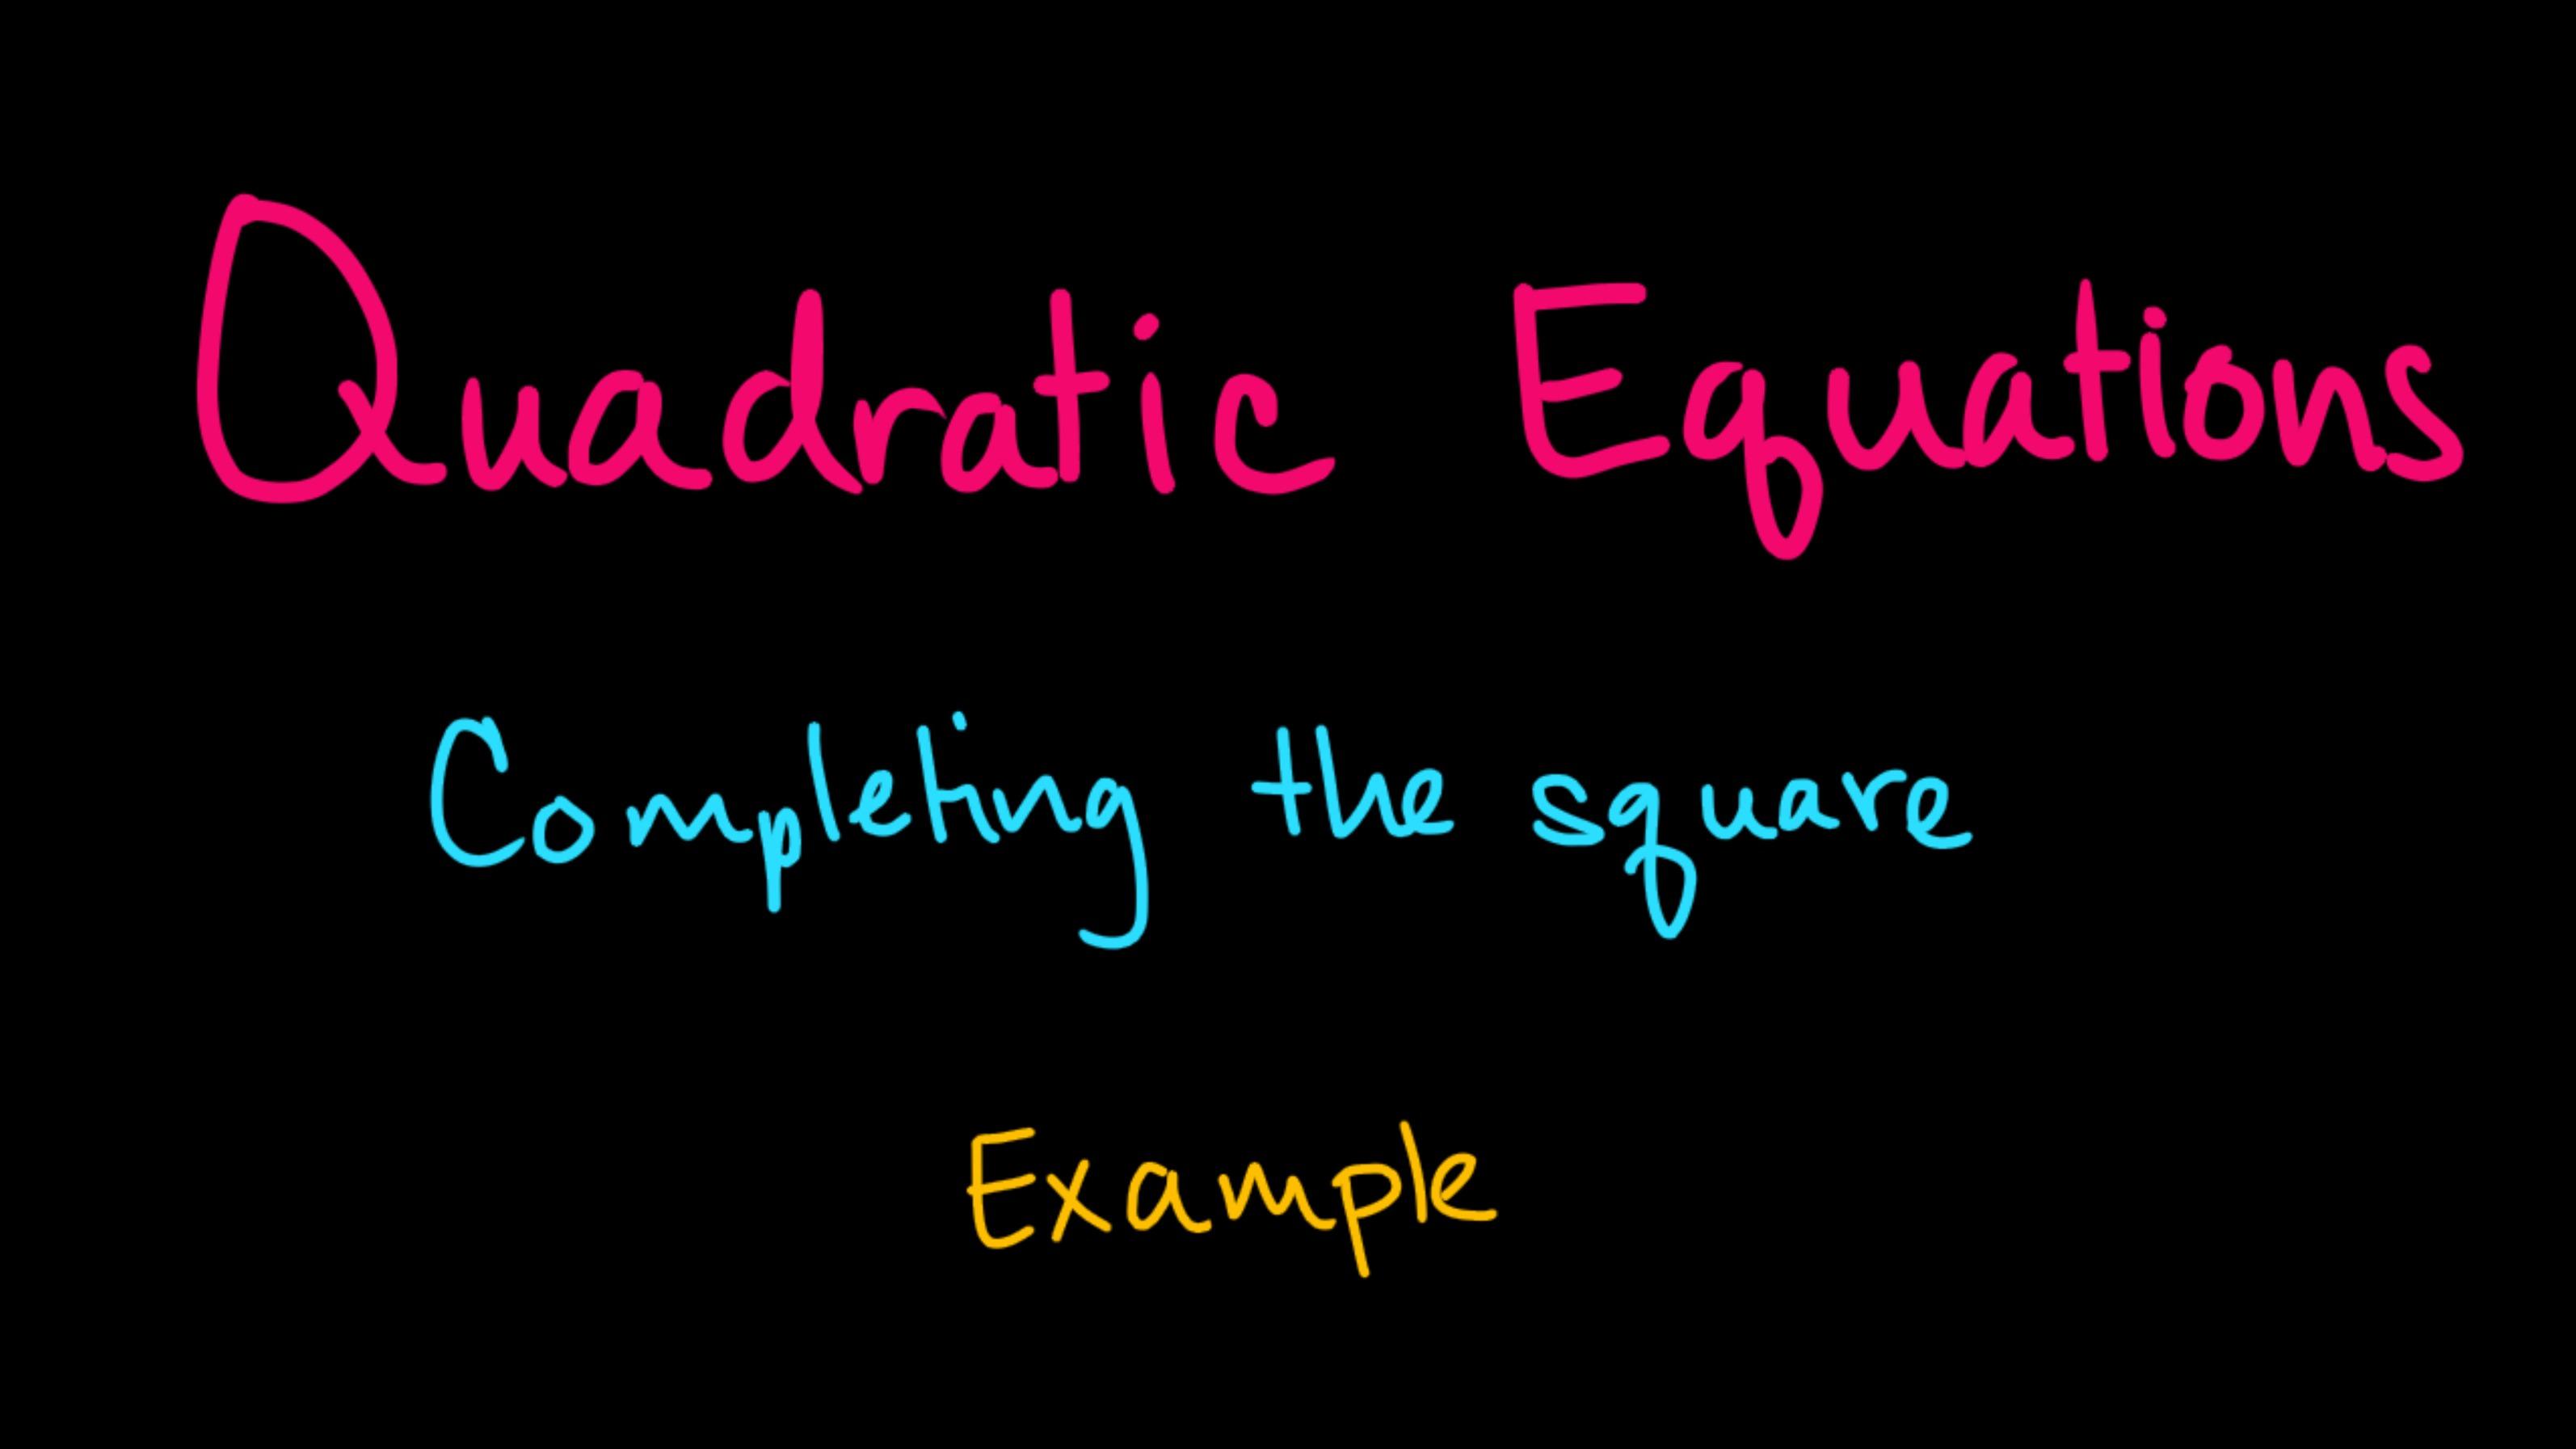 Quadratic Equations - Completing the square: a simple example